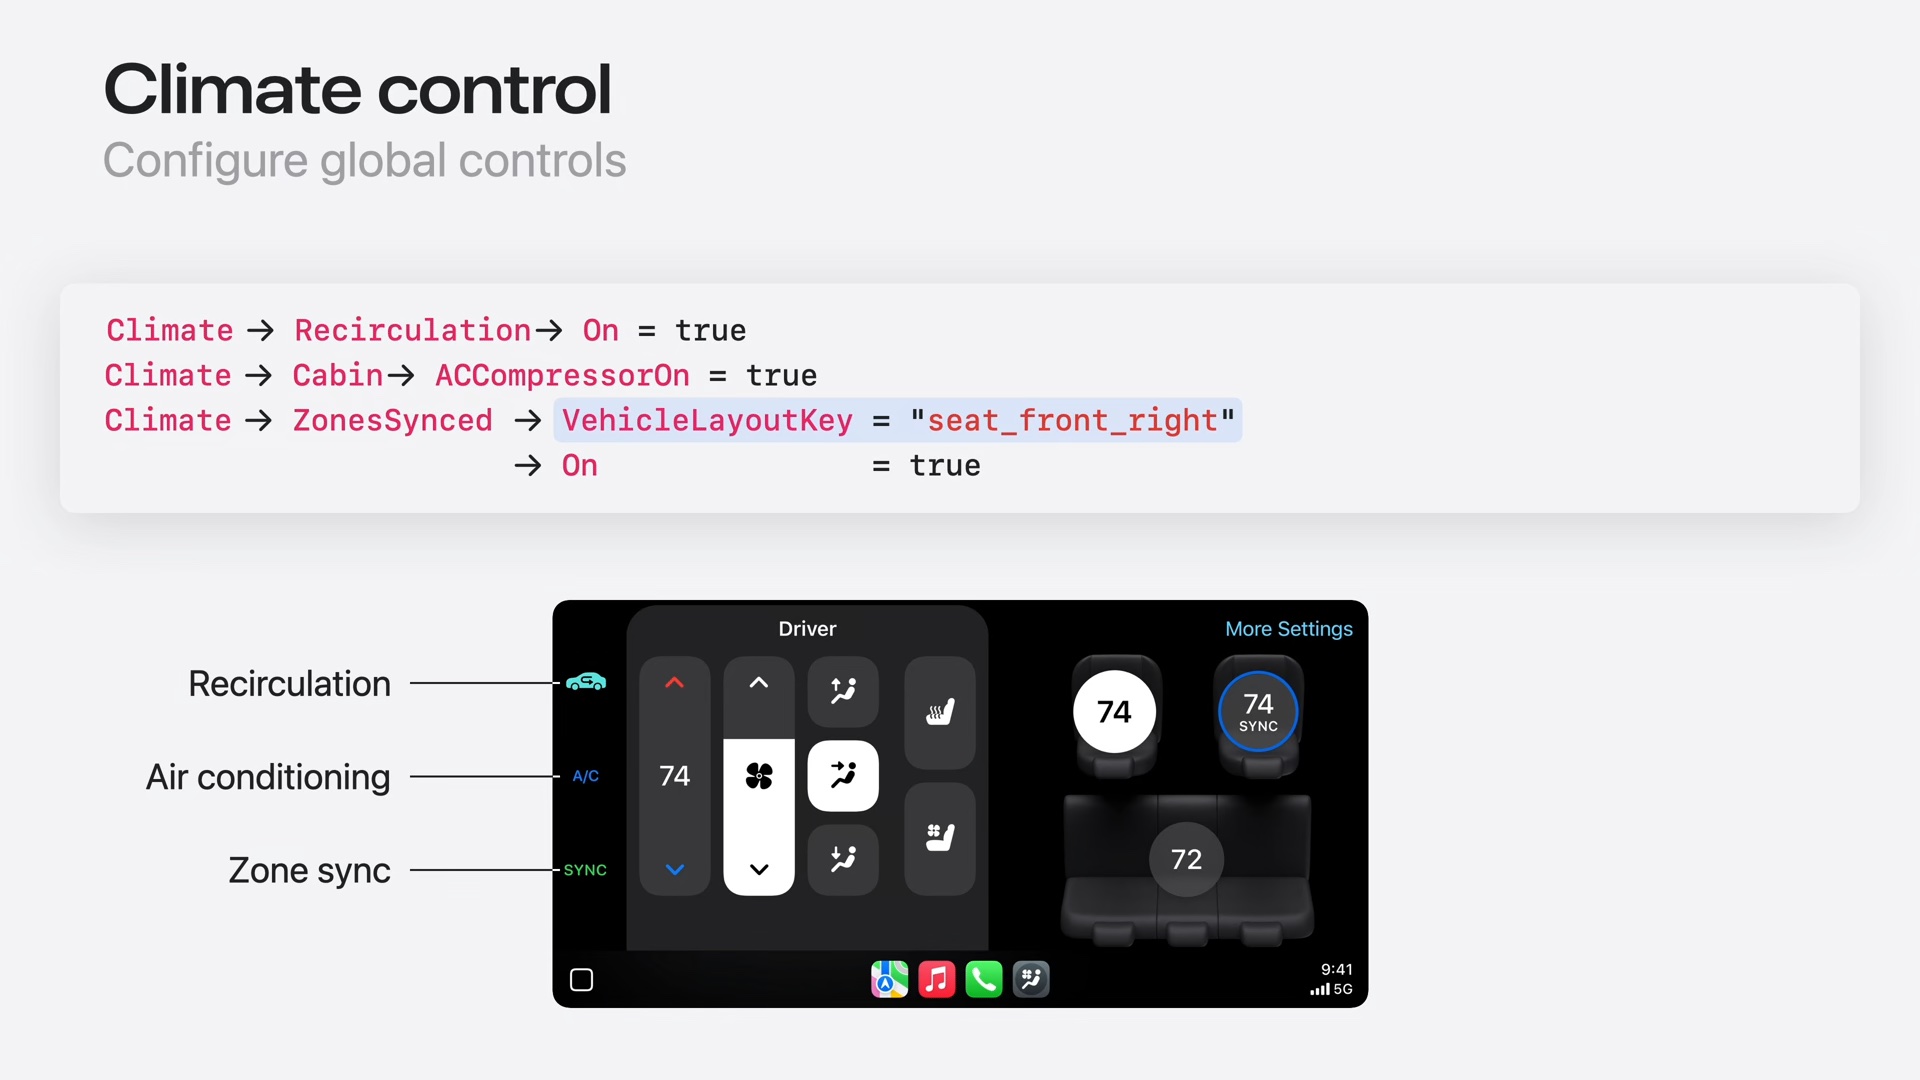 Still frame from the WWDC session showing the climate control screen.